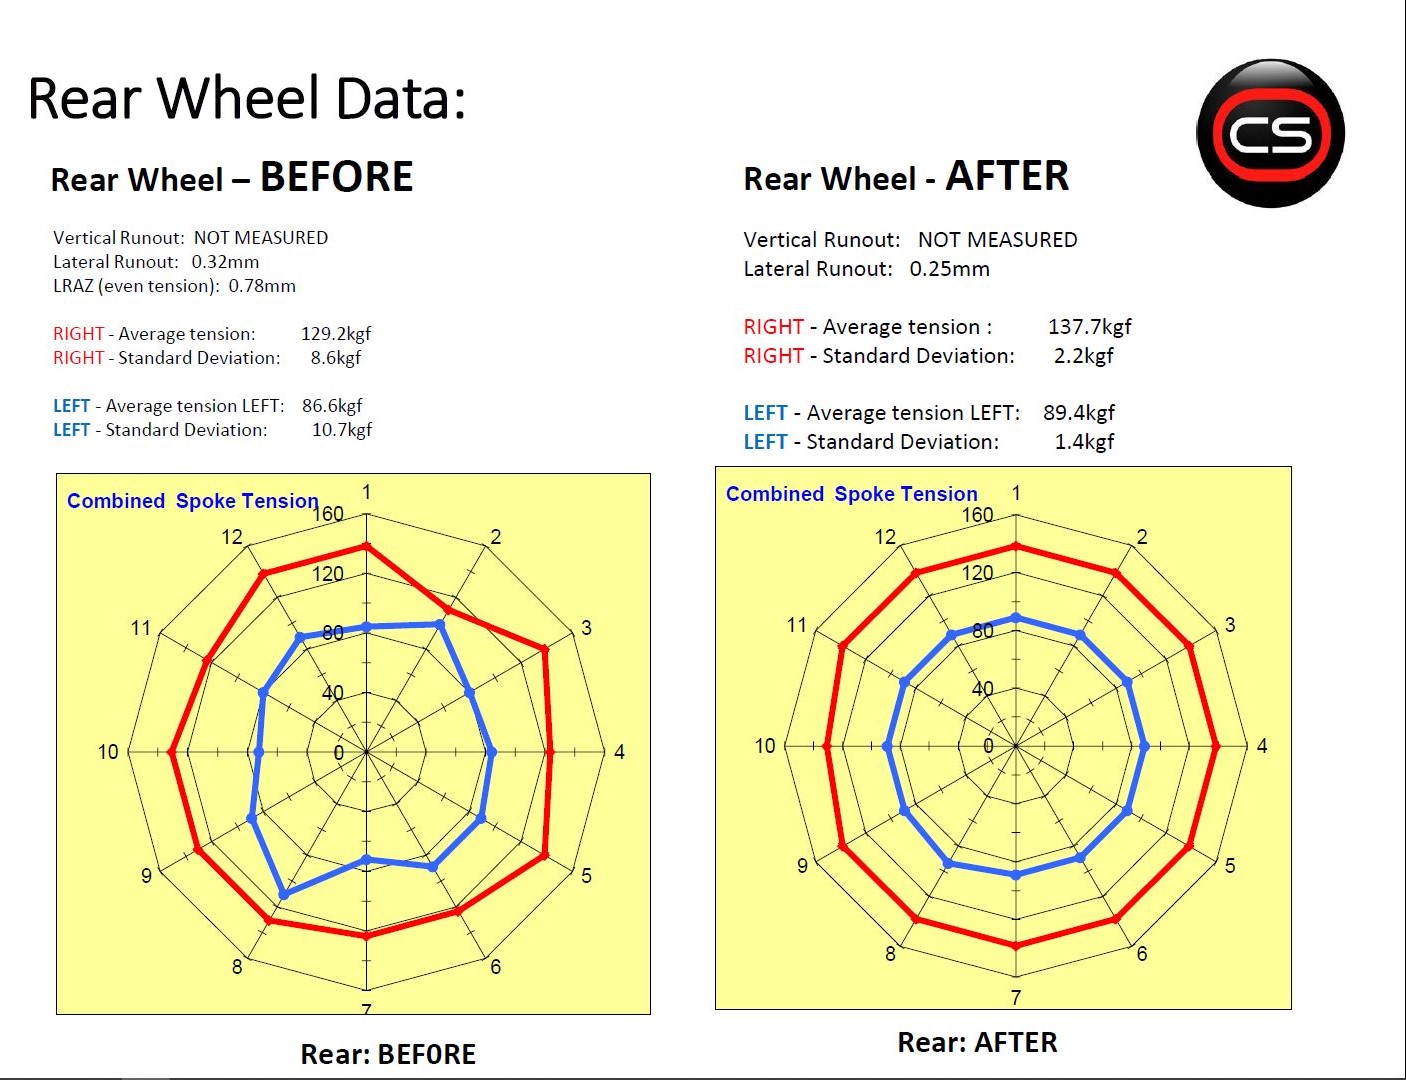 Rear Wheel Data - Before and After OCS optimization